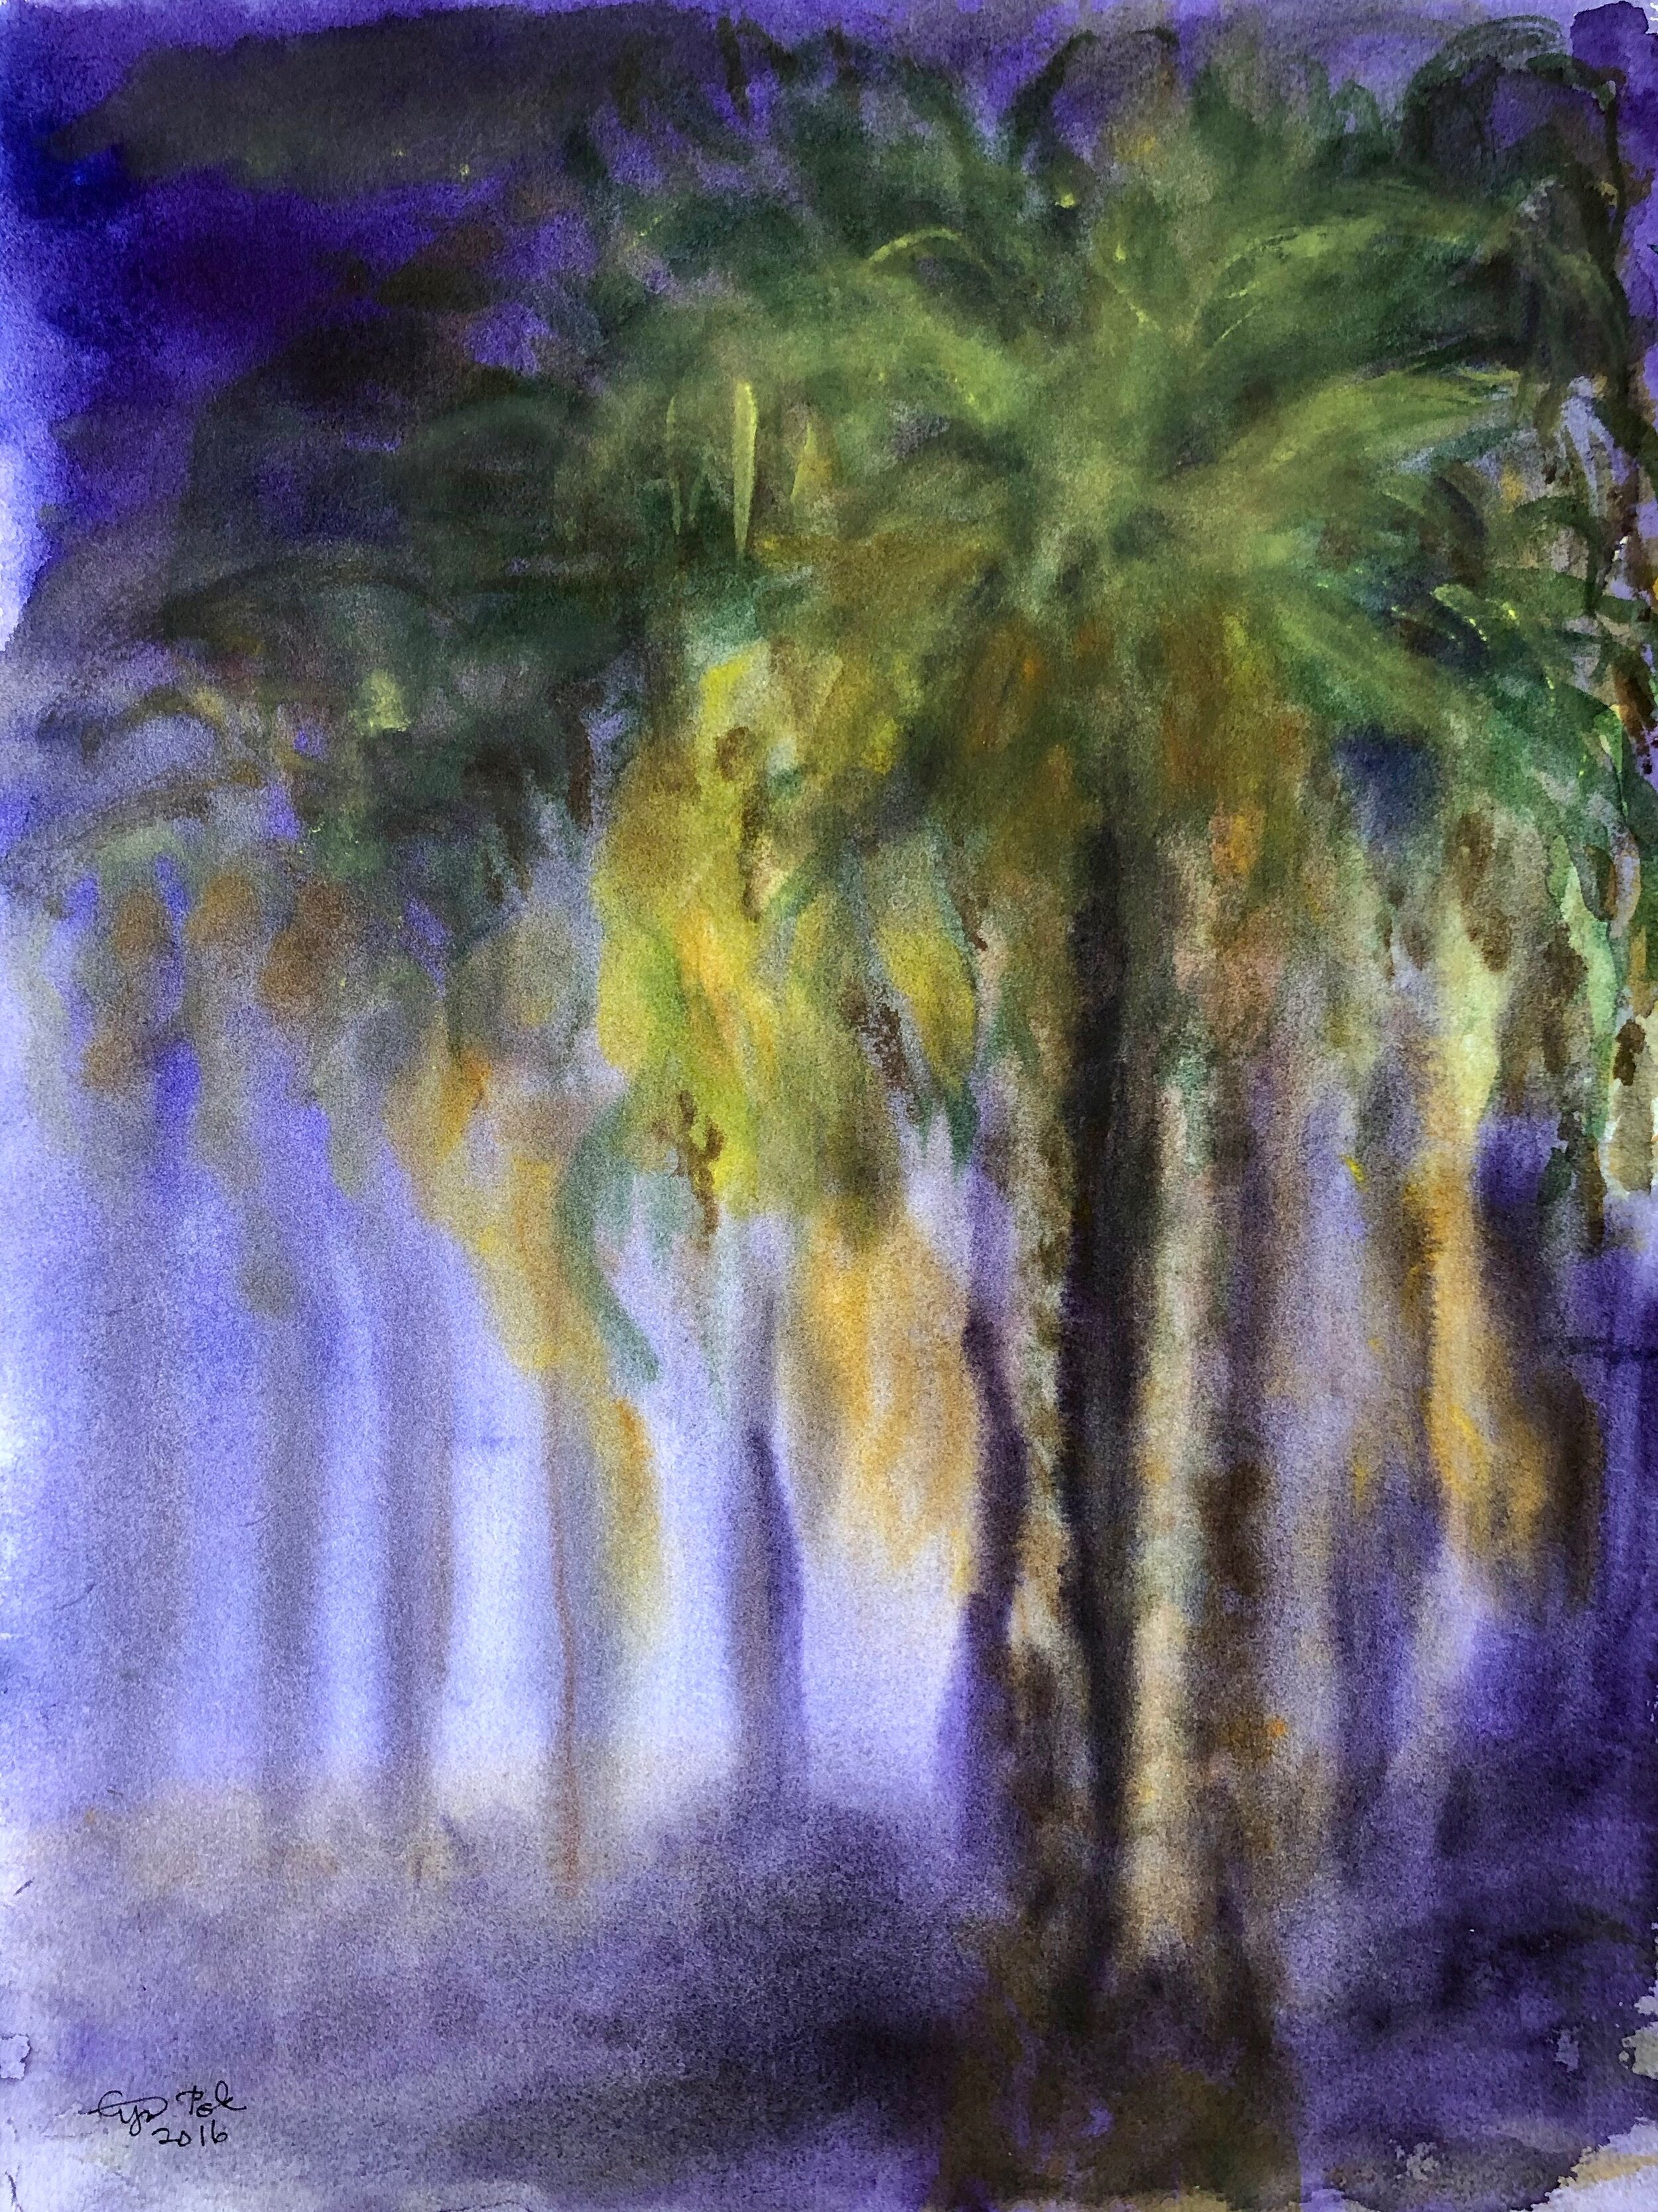  PALM FOREST BY NIGHT, 2016, 40X30cm 